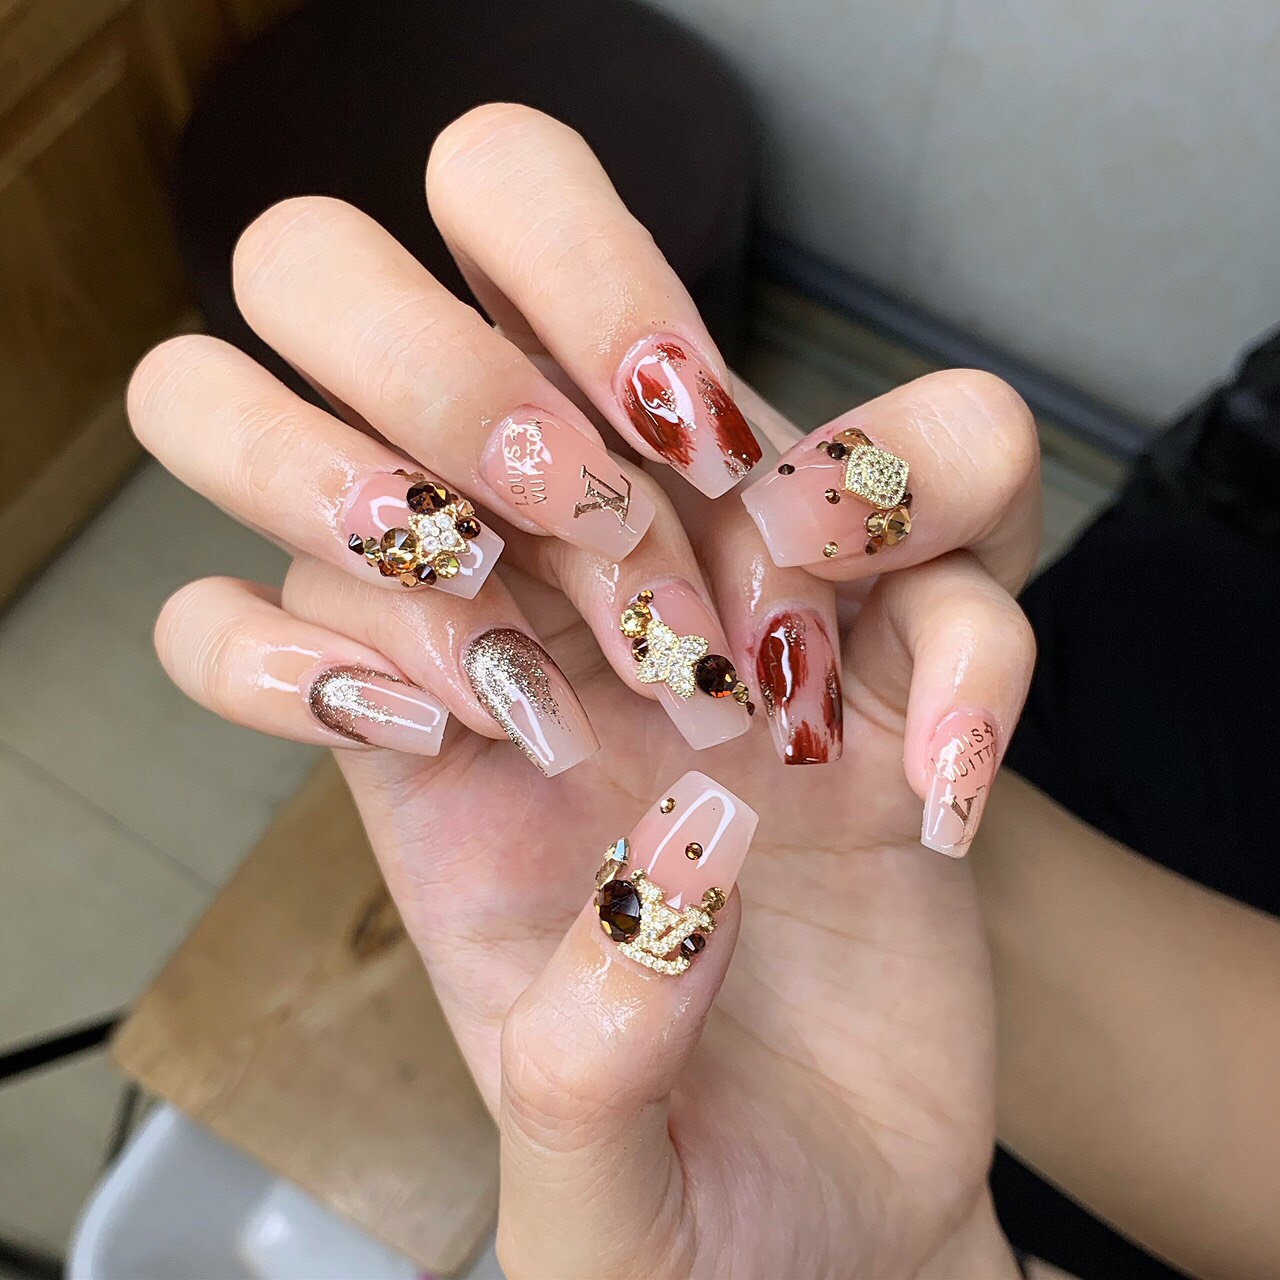 Her Beauty Nail 1